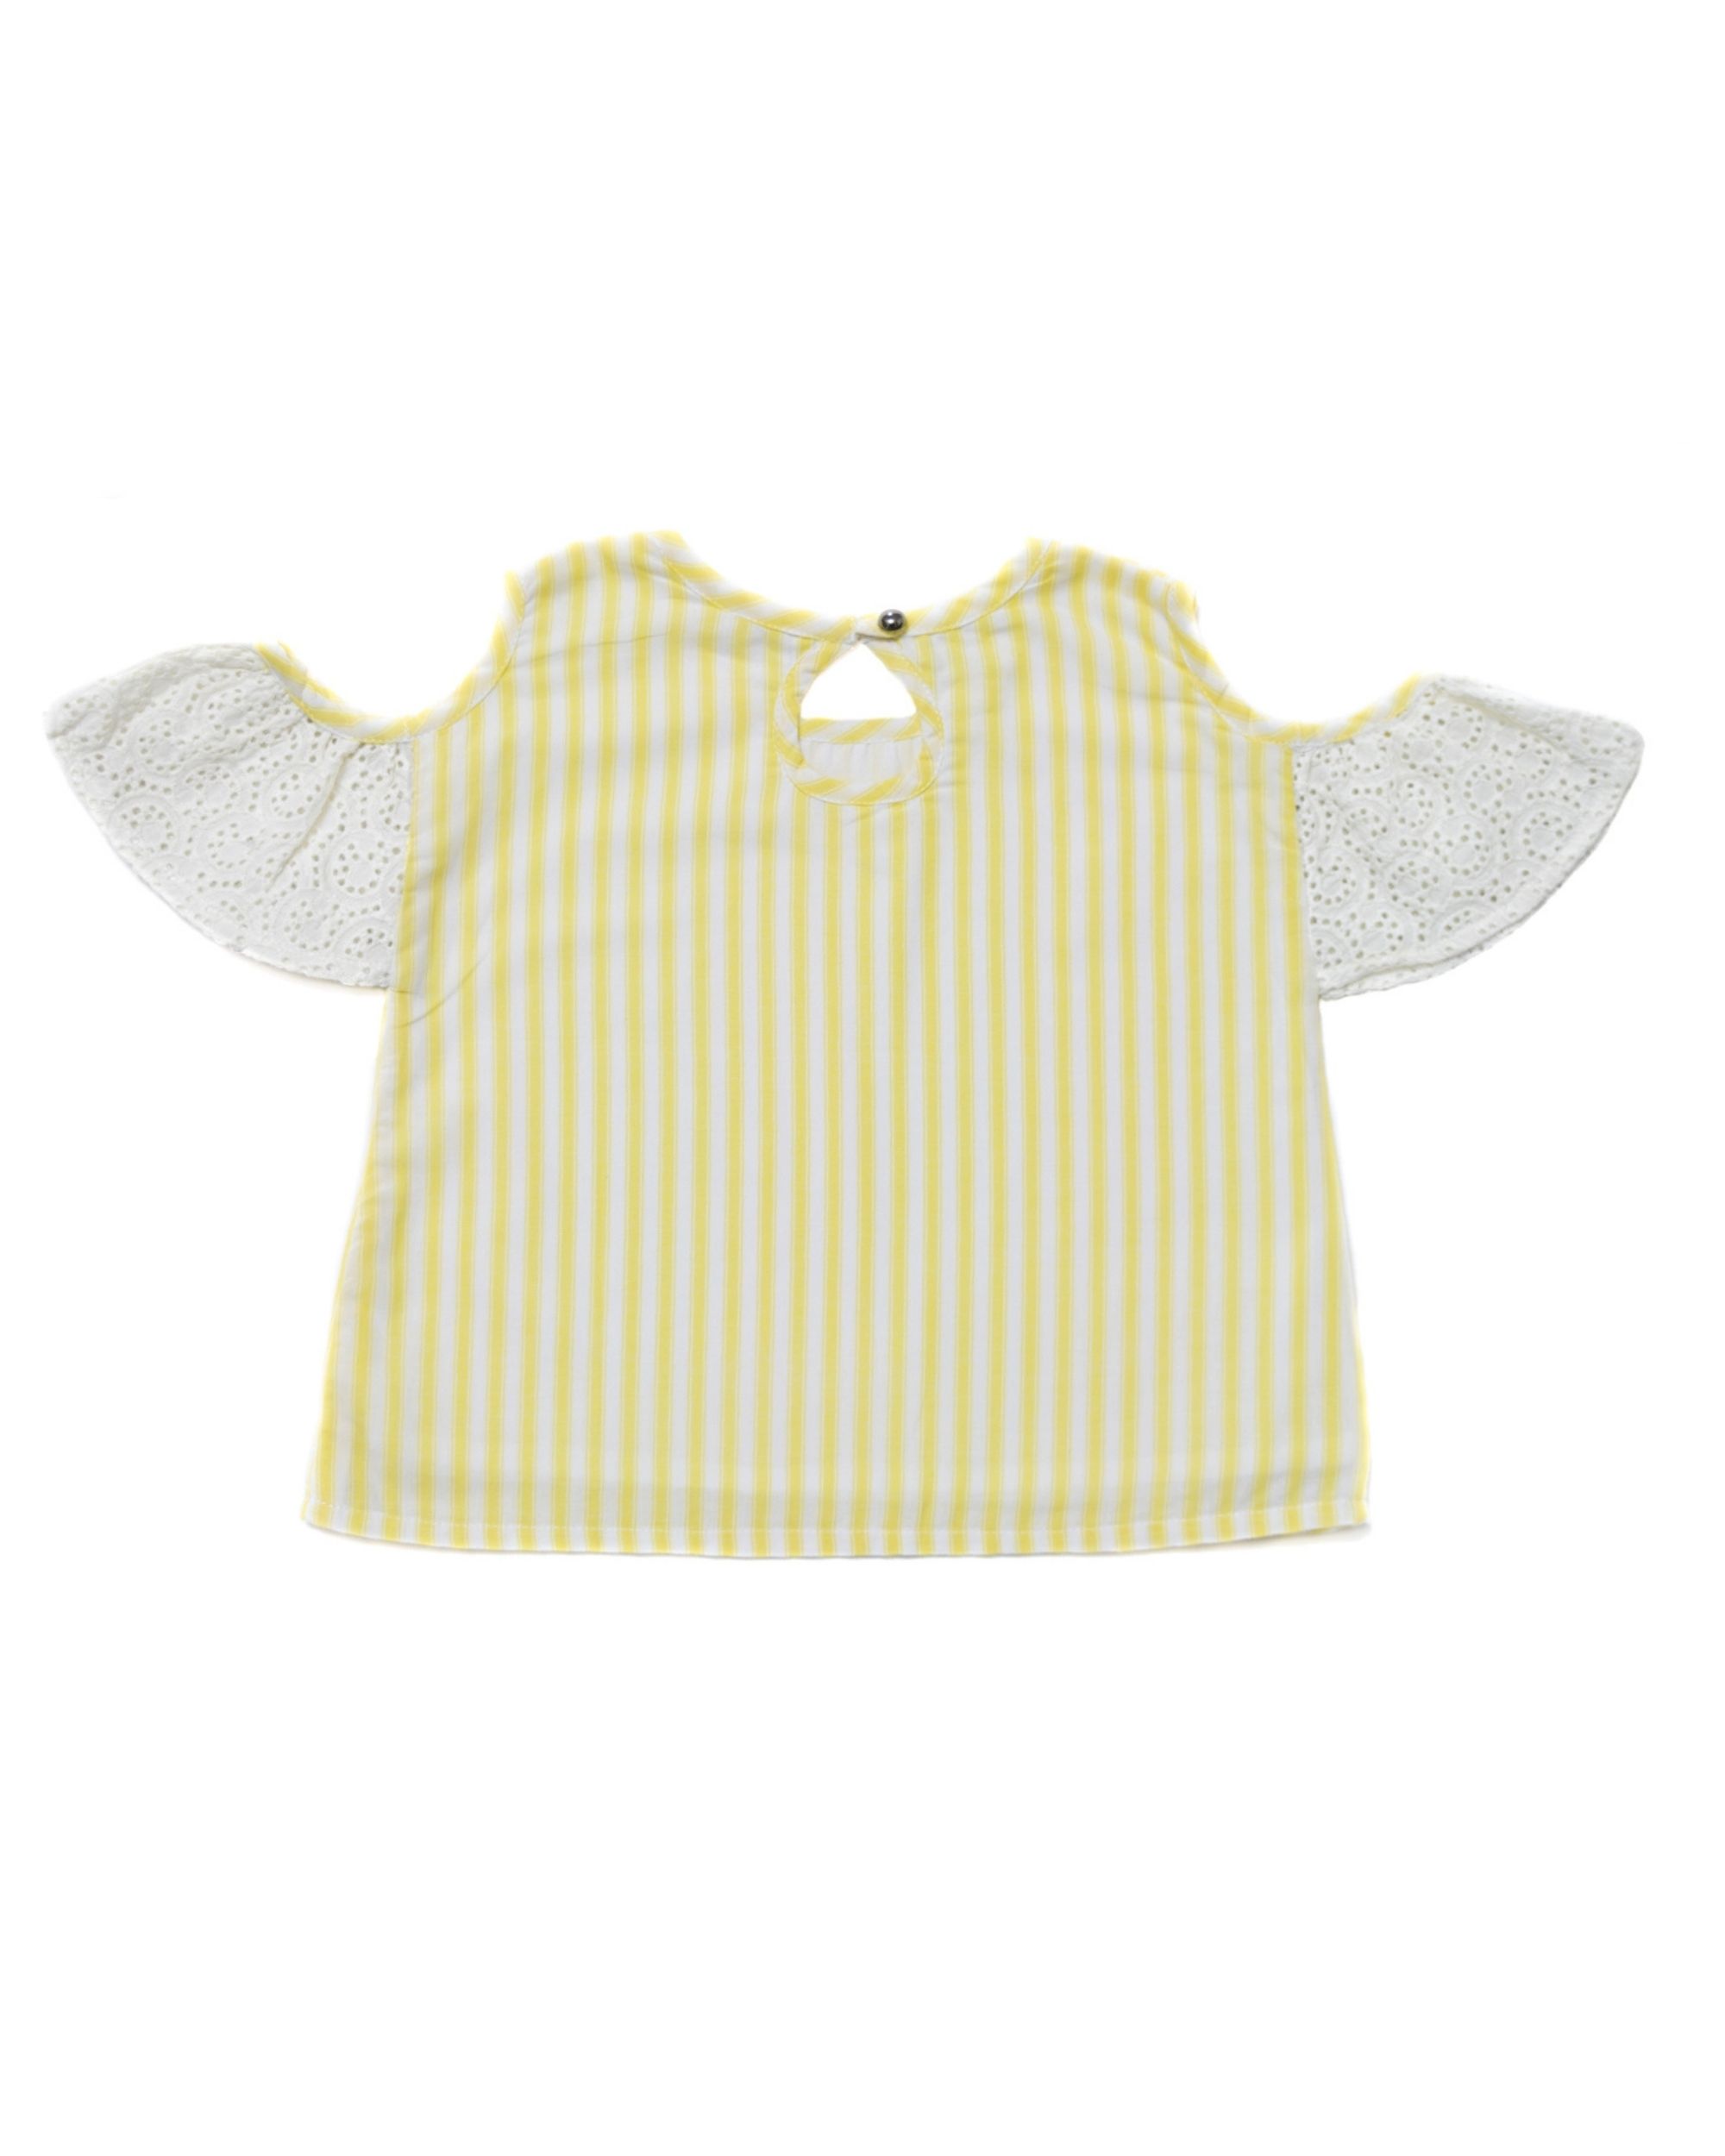 Yellow striped cold shoulder top by Kidko | The Secret Label